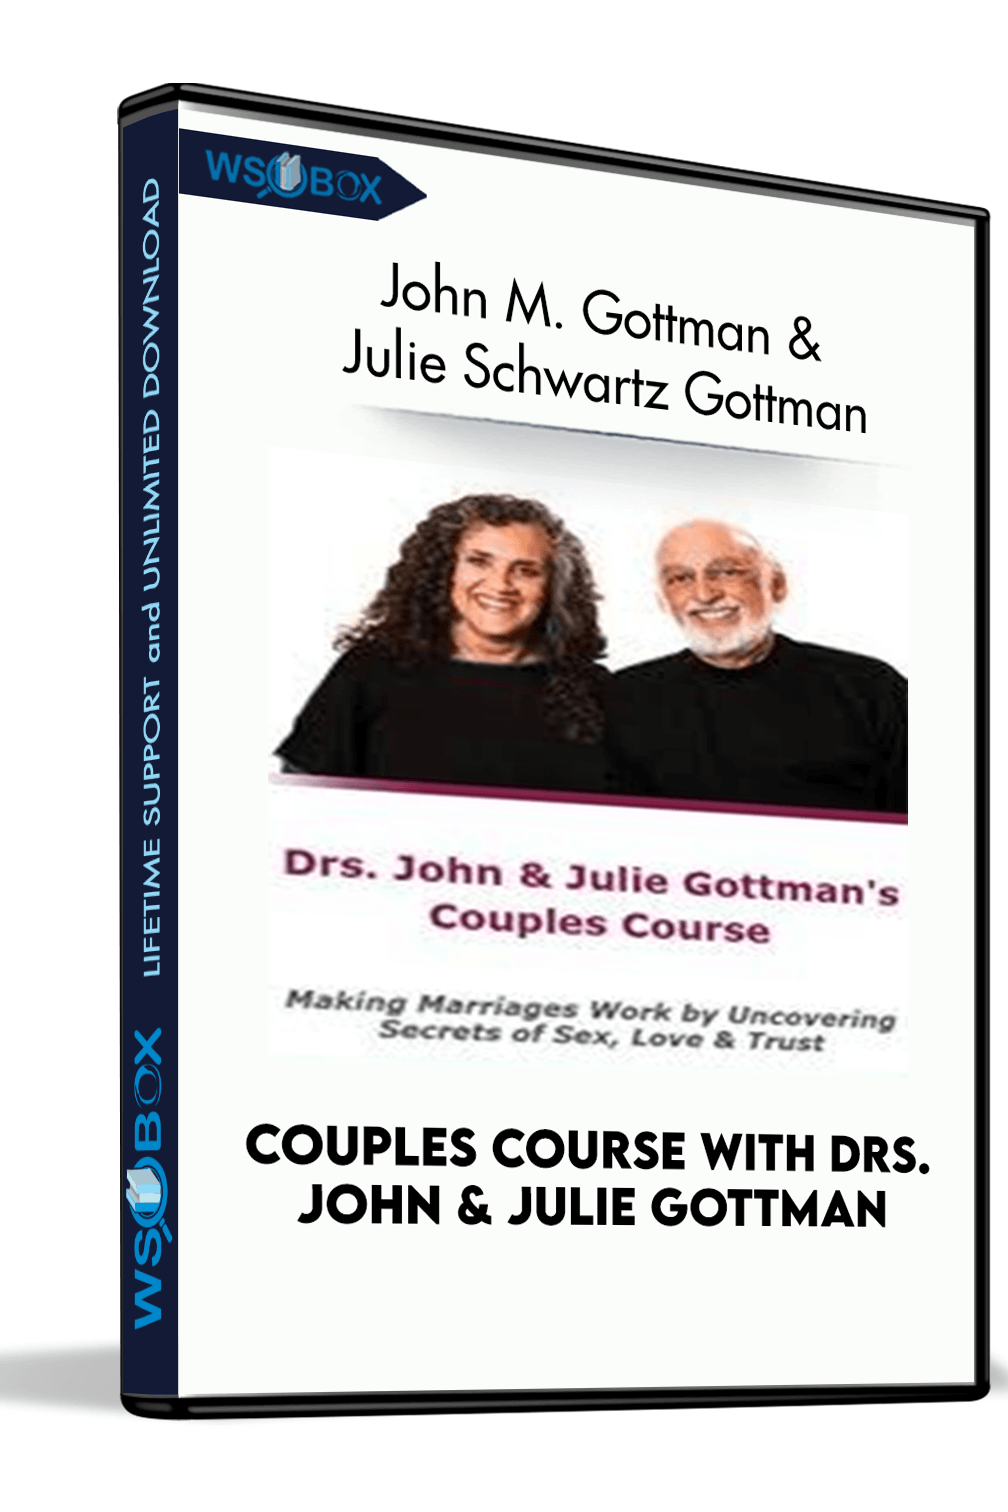 couples-course-with-drs-john-julie-gottman-making-marriages-work-by-uncovering-secrets-of-sex-love-trust-john-m-gottman-julie-schwartz-gottman